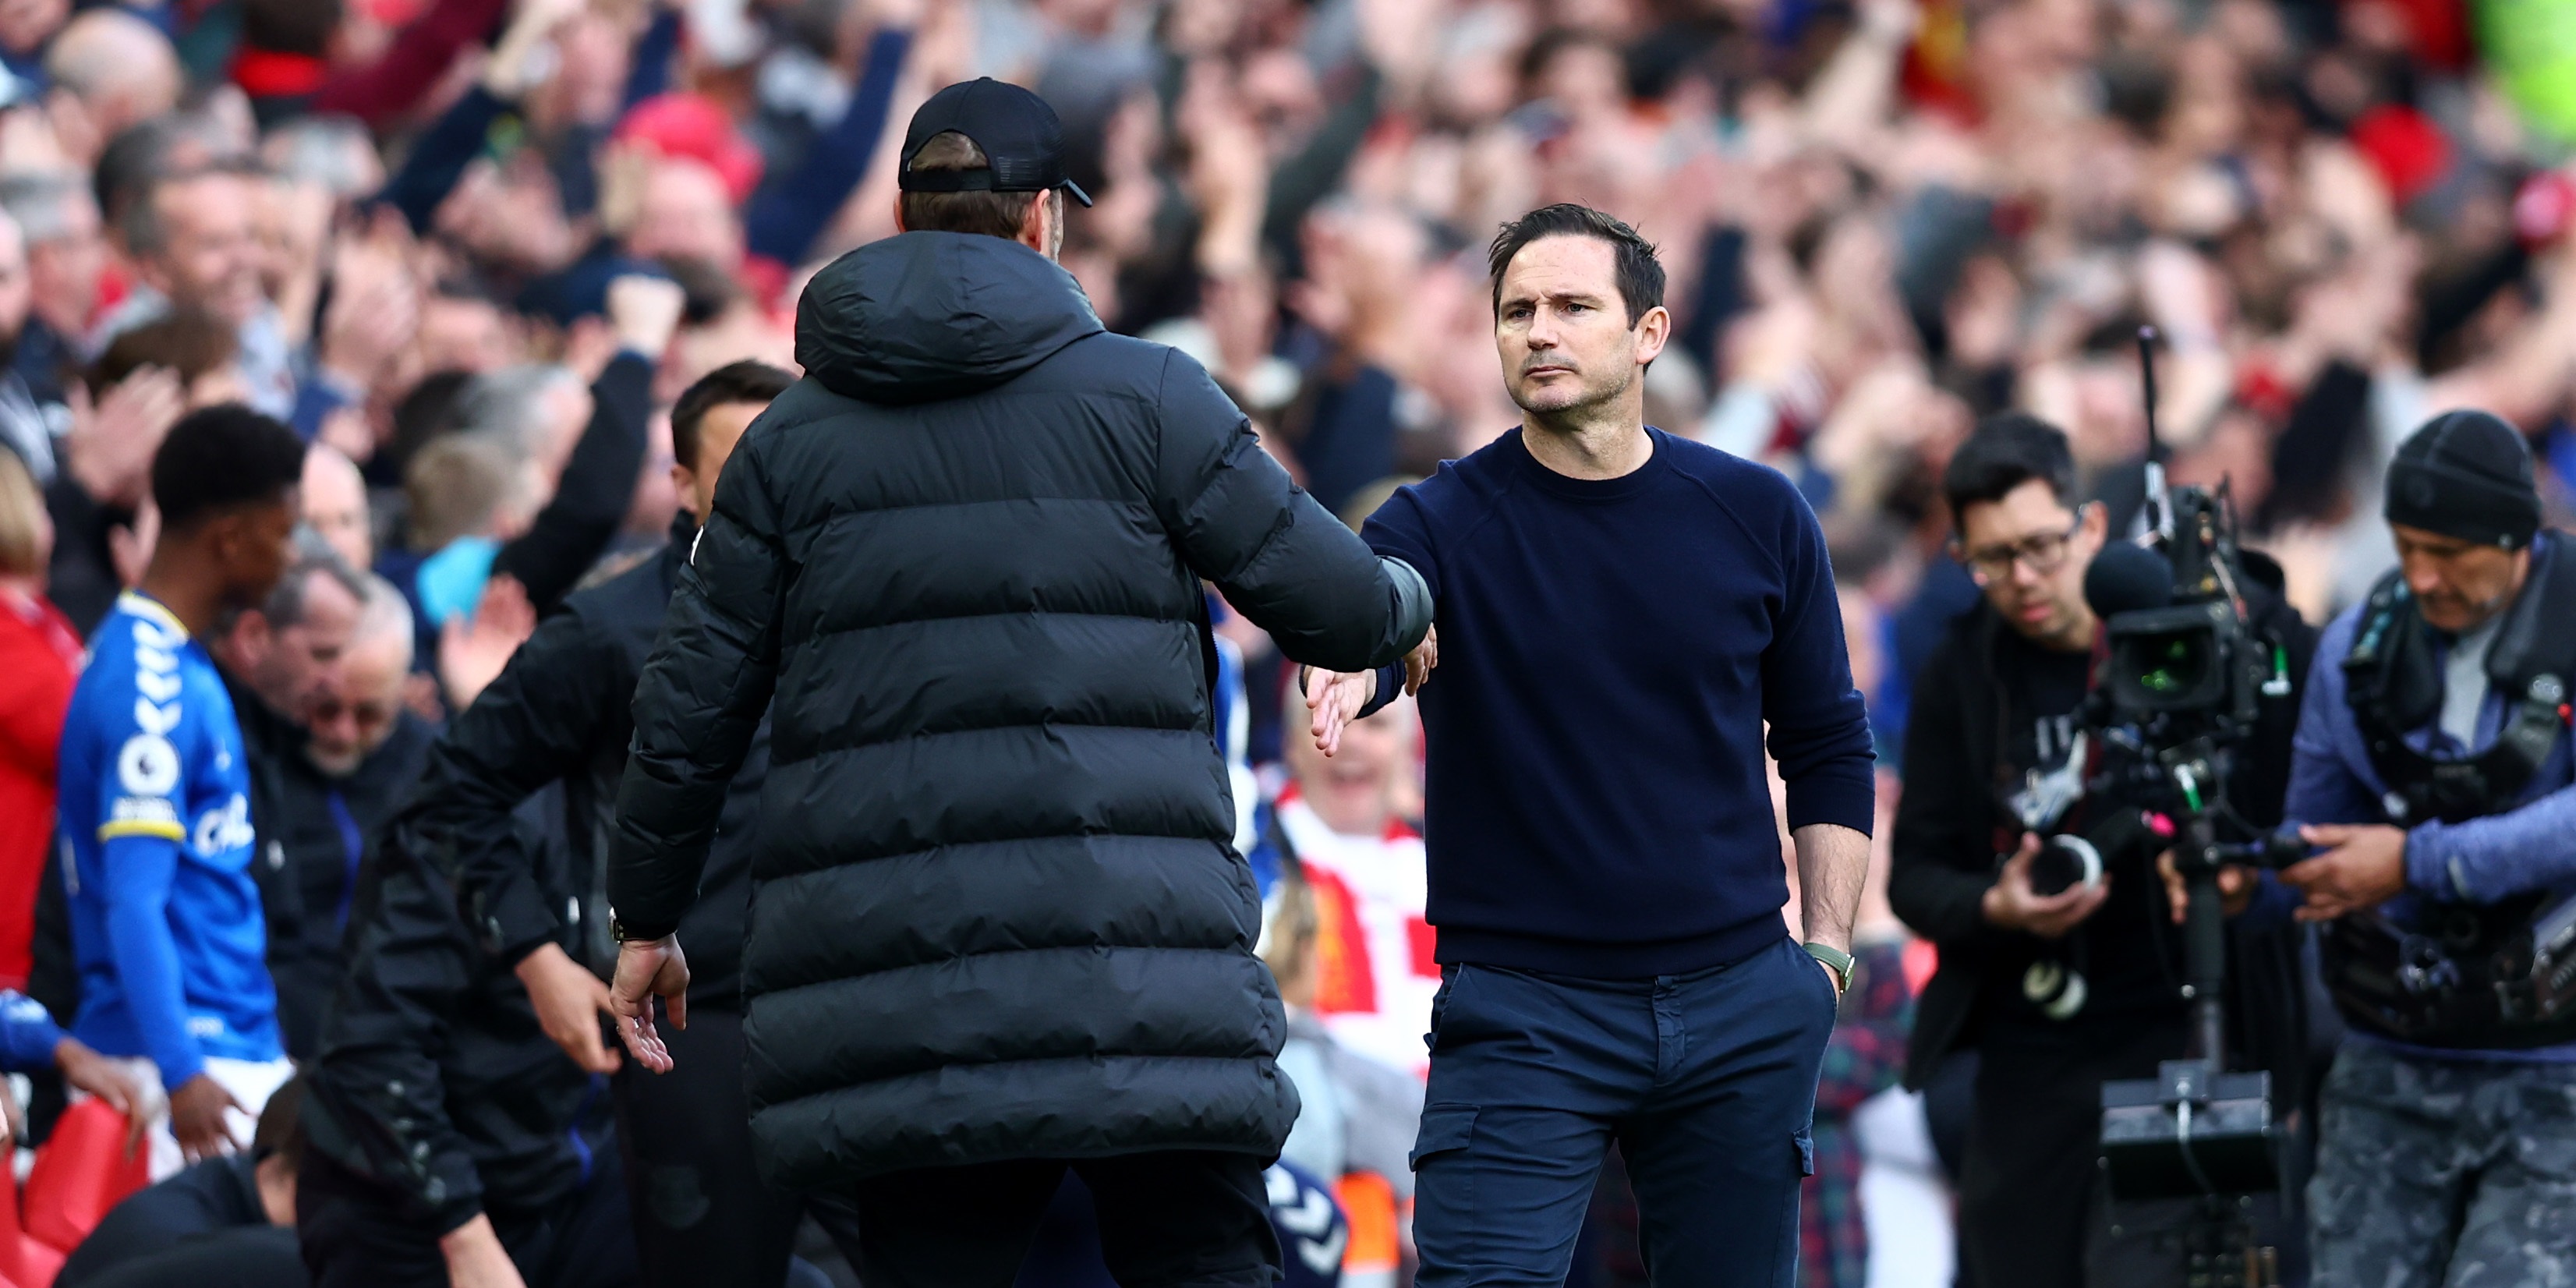 Klopp shares ‘the reality’ of Liverpool’s Merseyside derby victory after Lampard’s penalty complaint